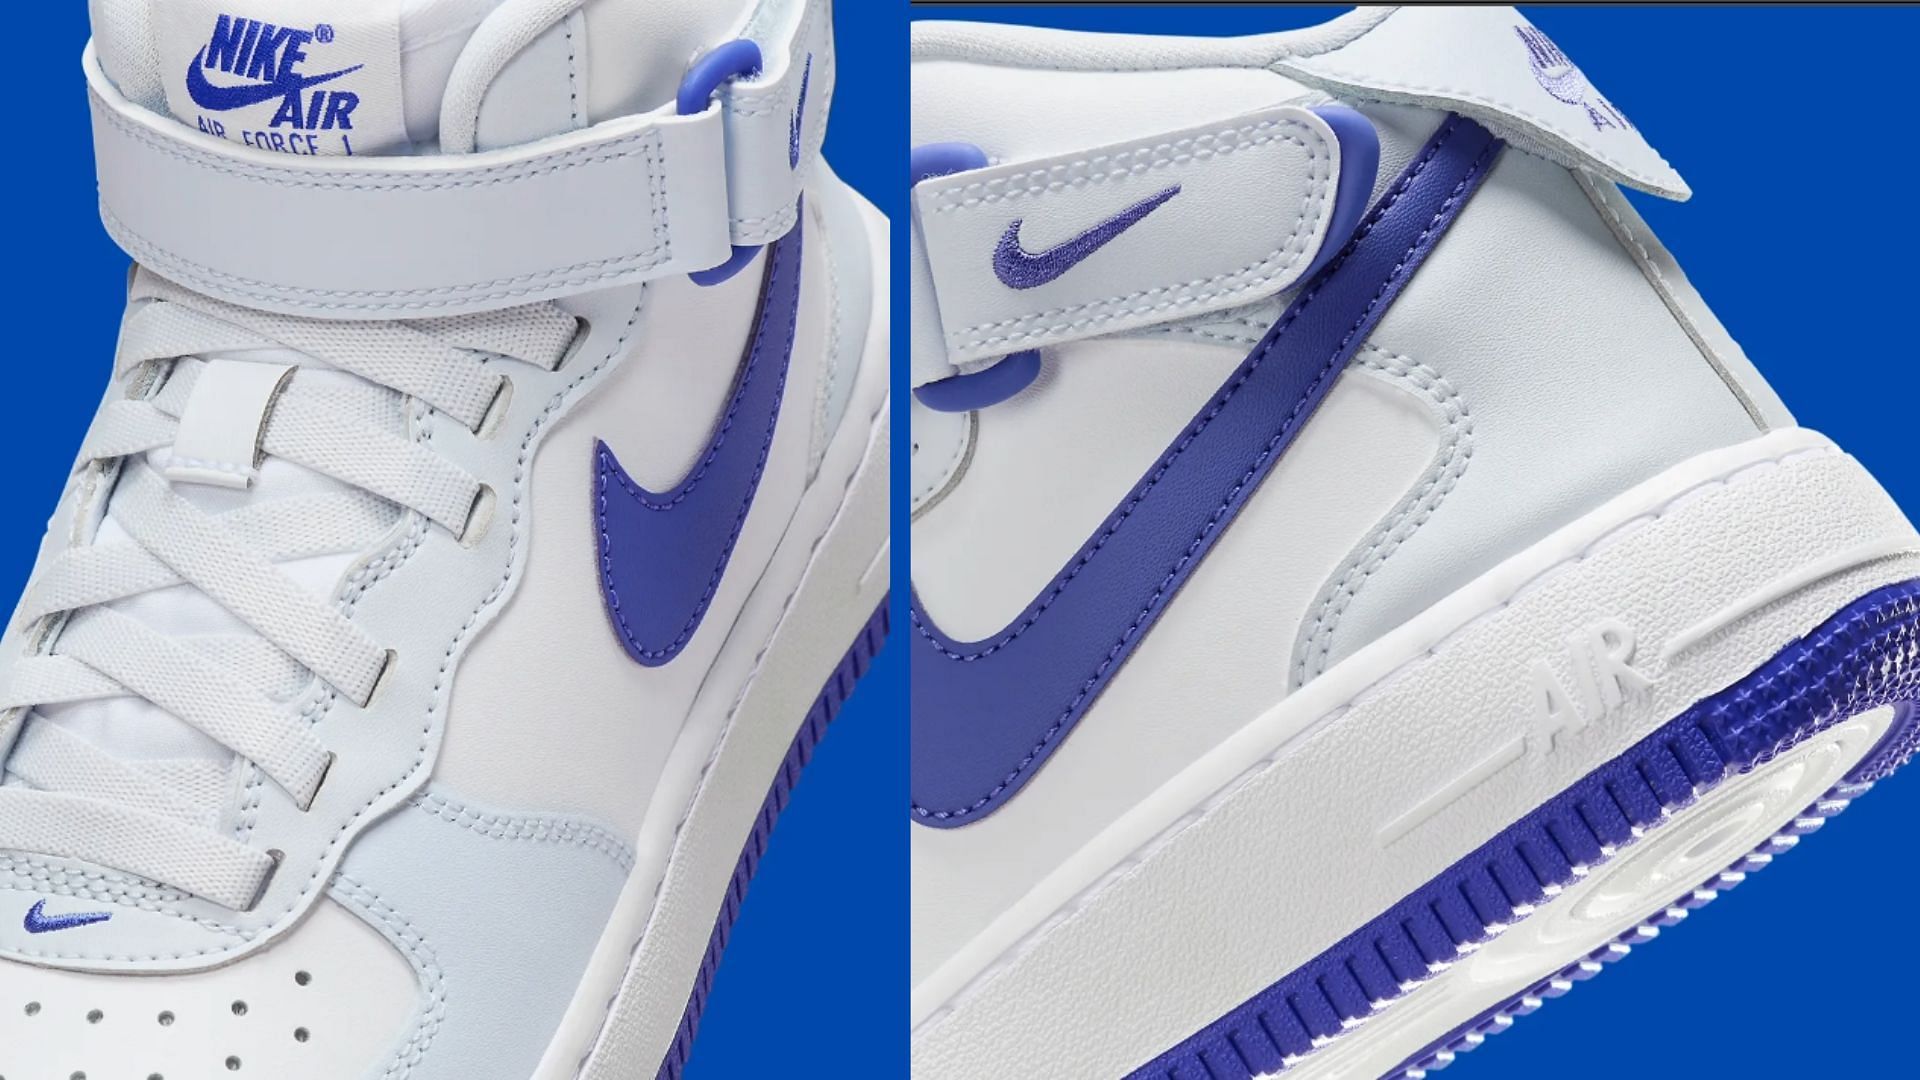 Nike: Nike Air Force 1 Mid “Royal Blue” shoes: Everything we know so far